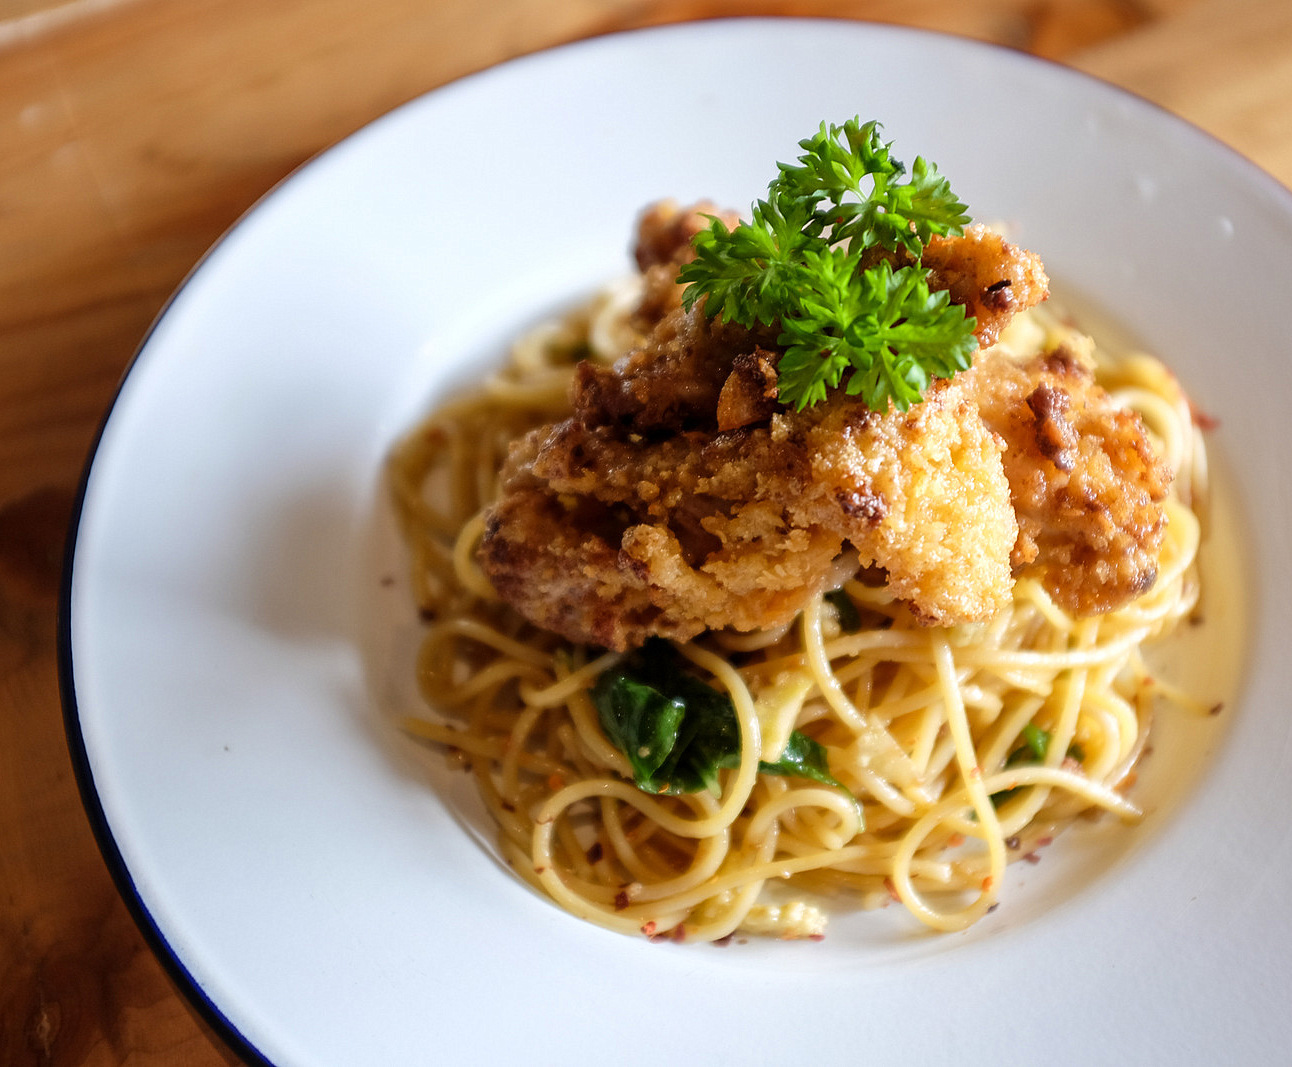 14. The Morning After - salted egg yolk chicken pasta